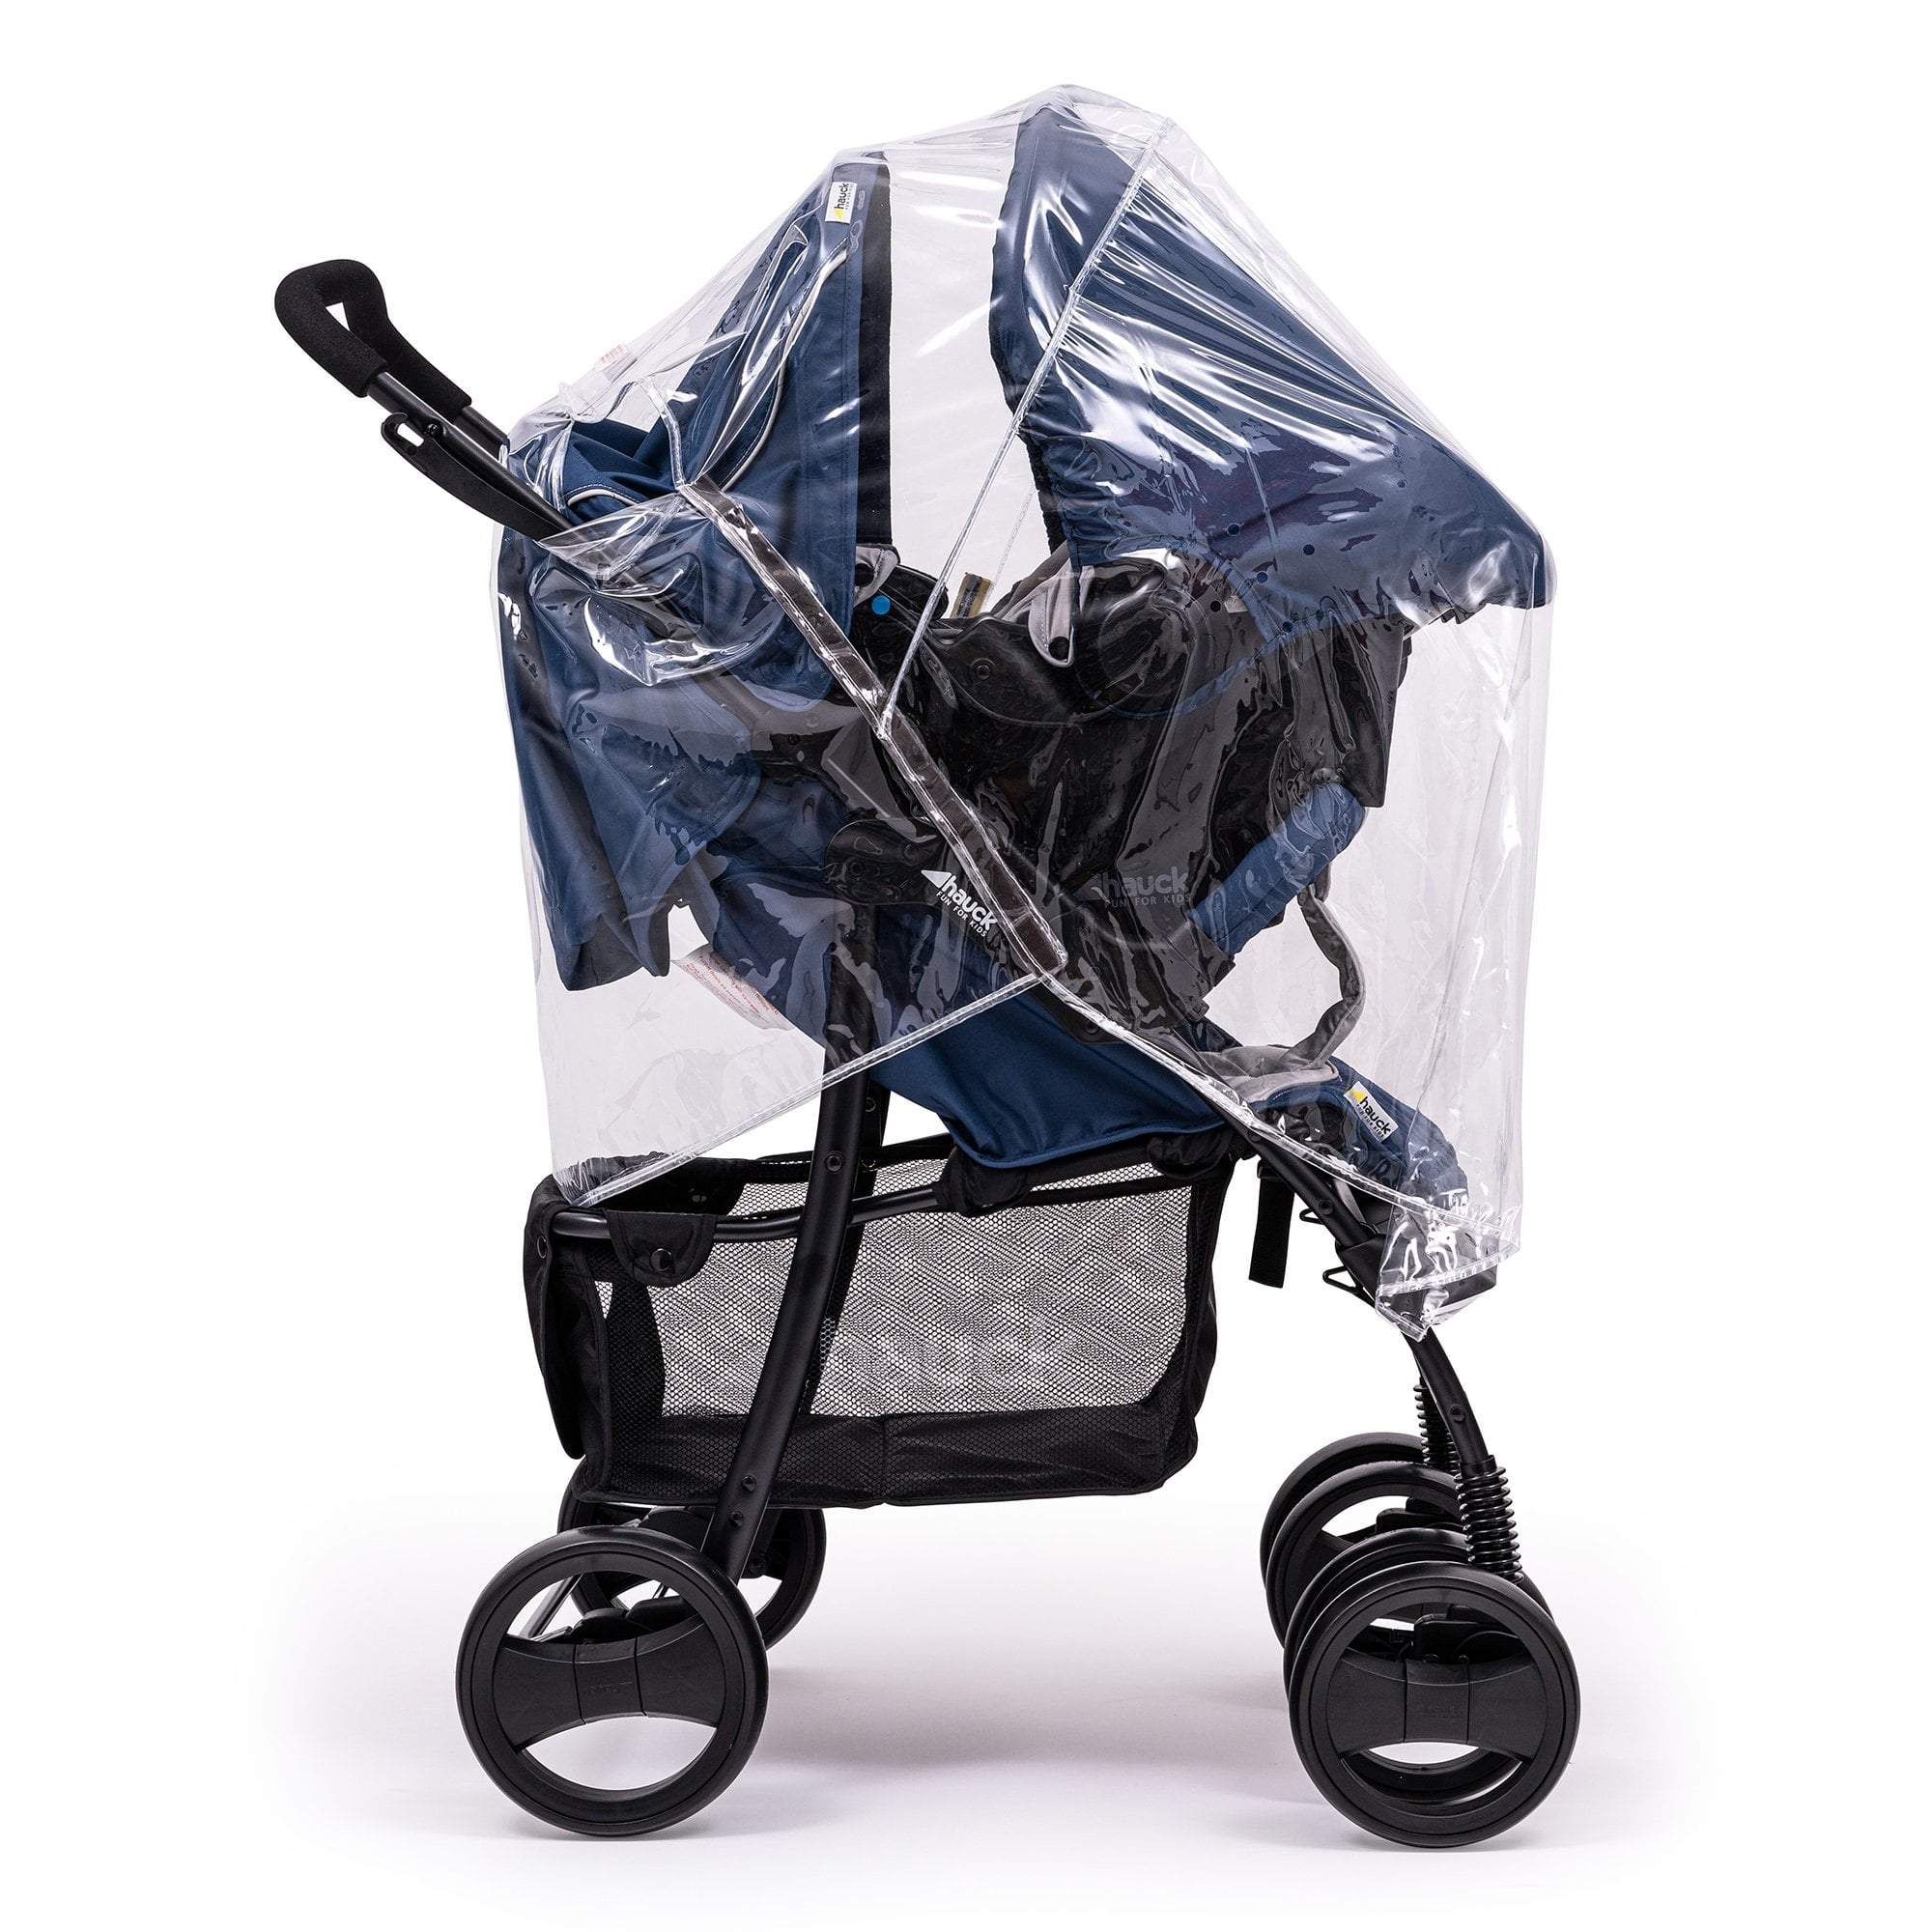 Travel System Raincover Compatible with Kiddy - Fits All Models - For Your Little One